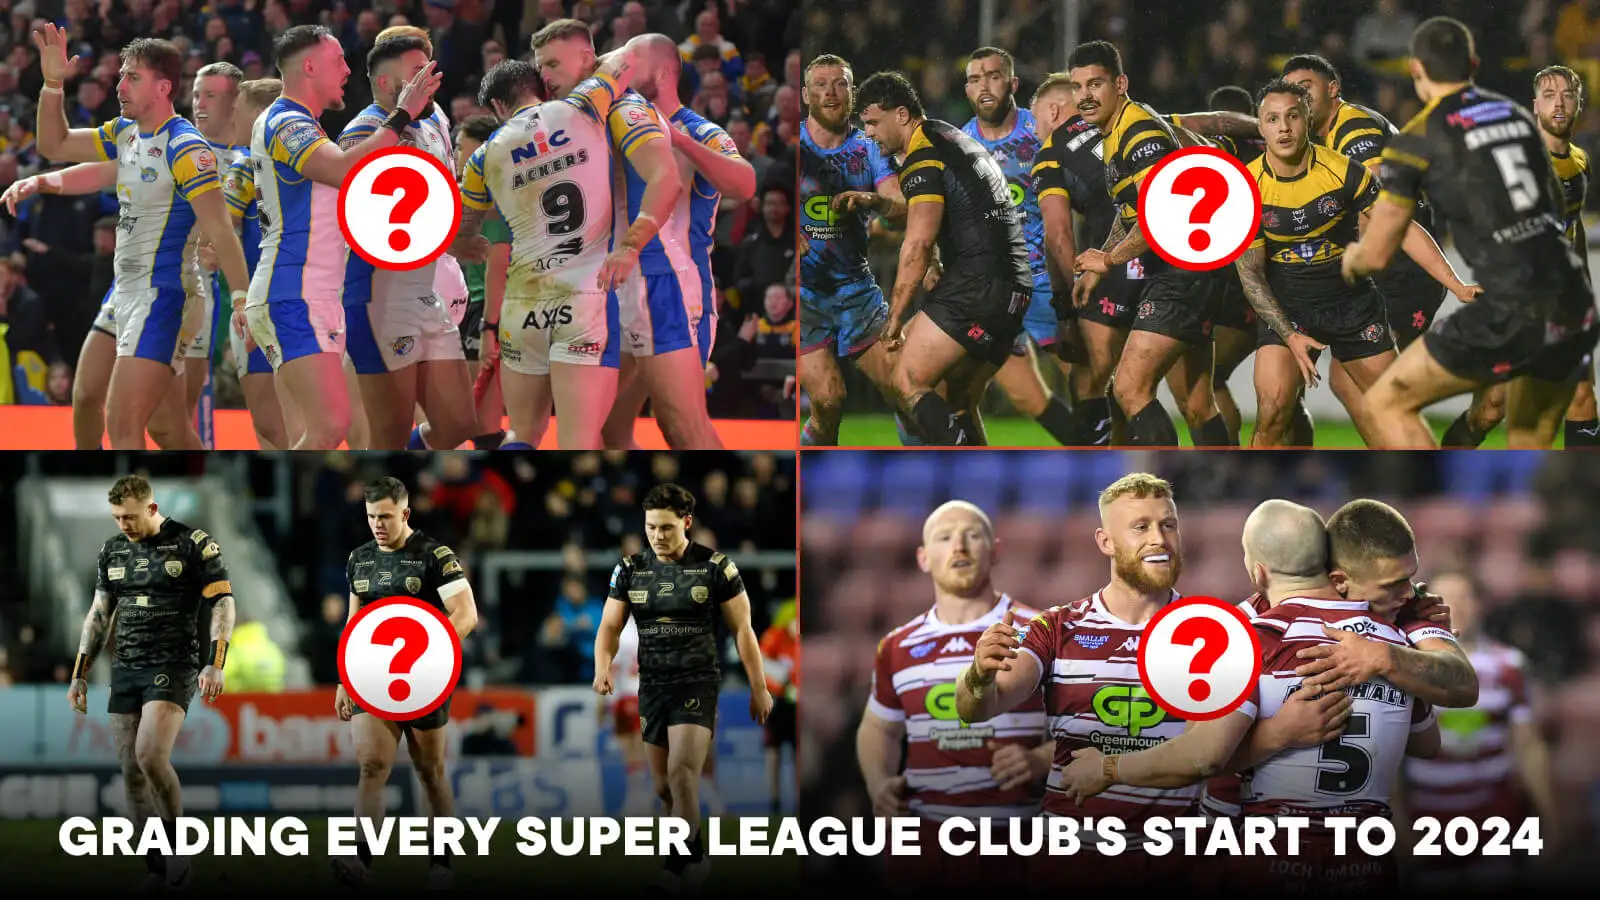 Grading every Super League club’s start to the 2024 season